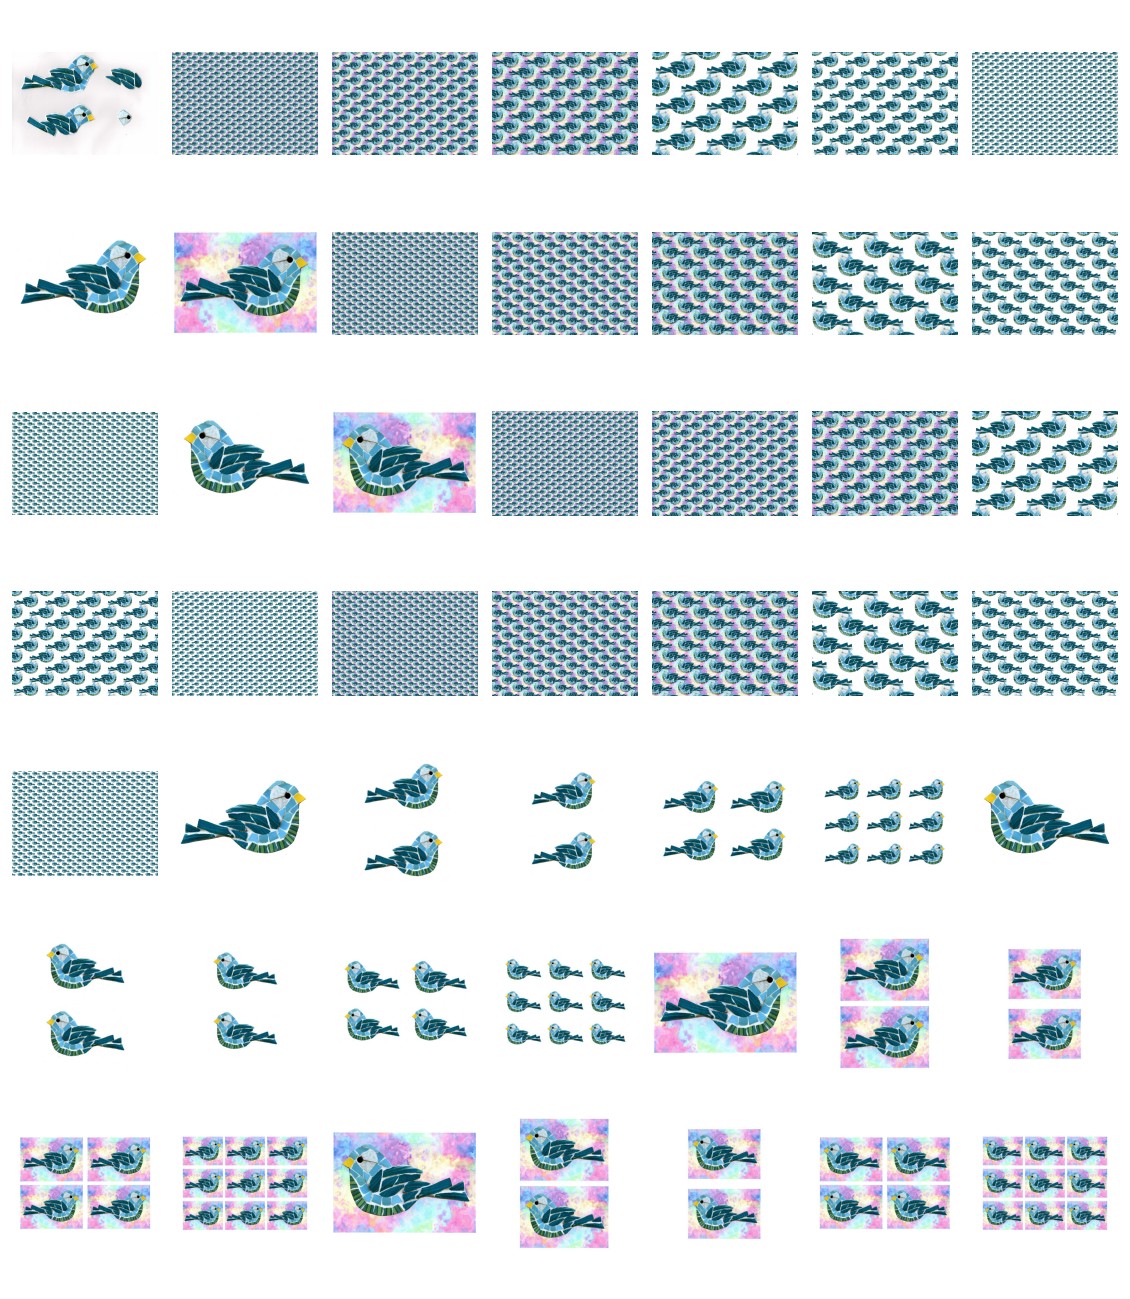 Tiled Effect Birds - Set 10 - 48 Pages to Download